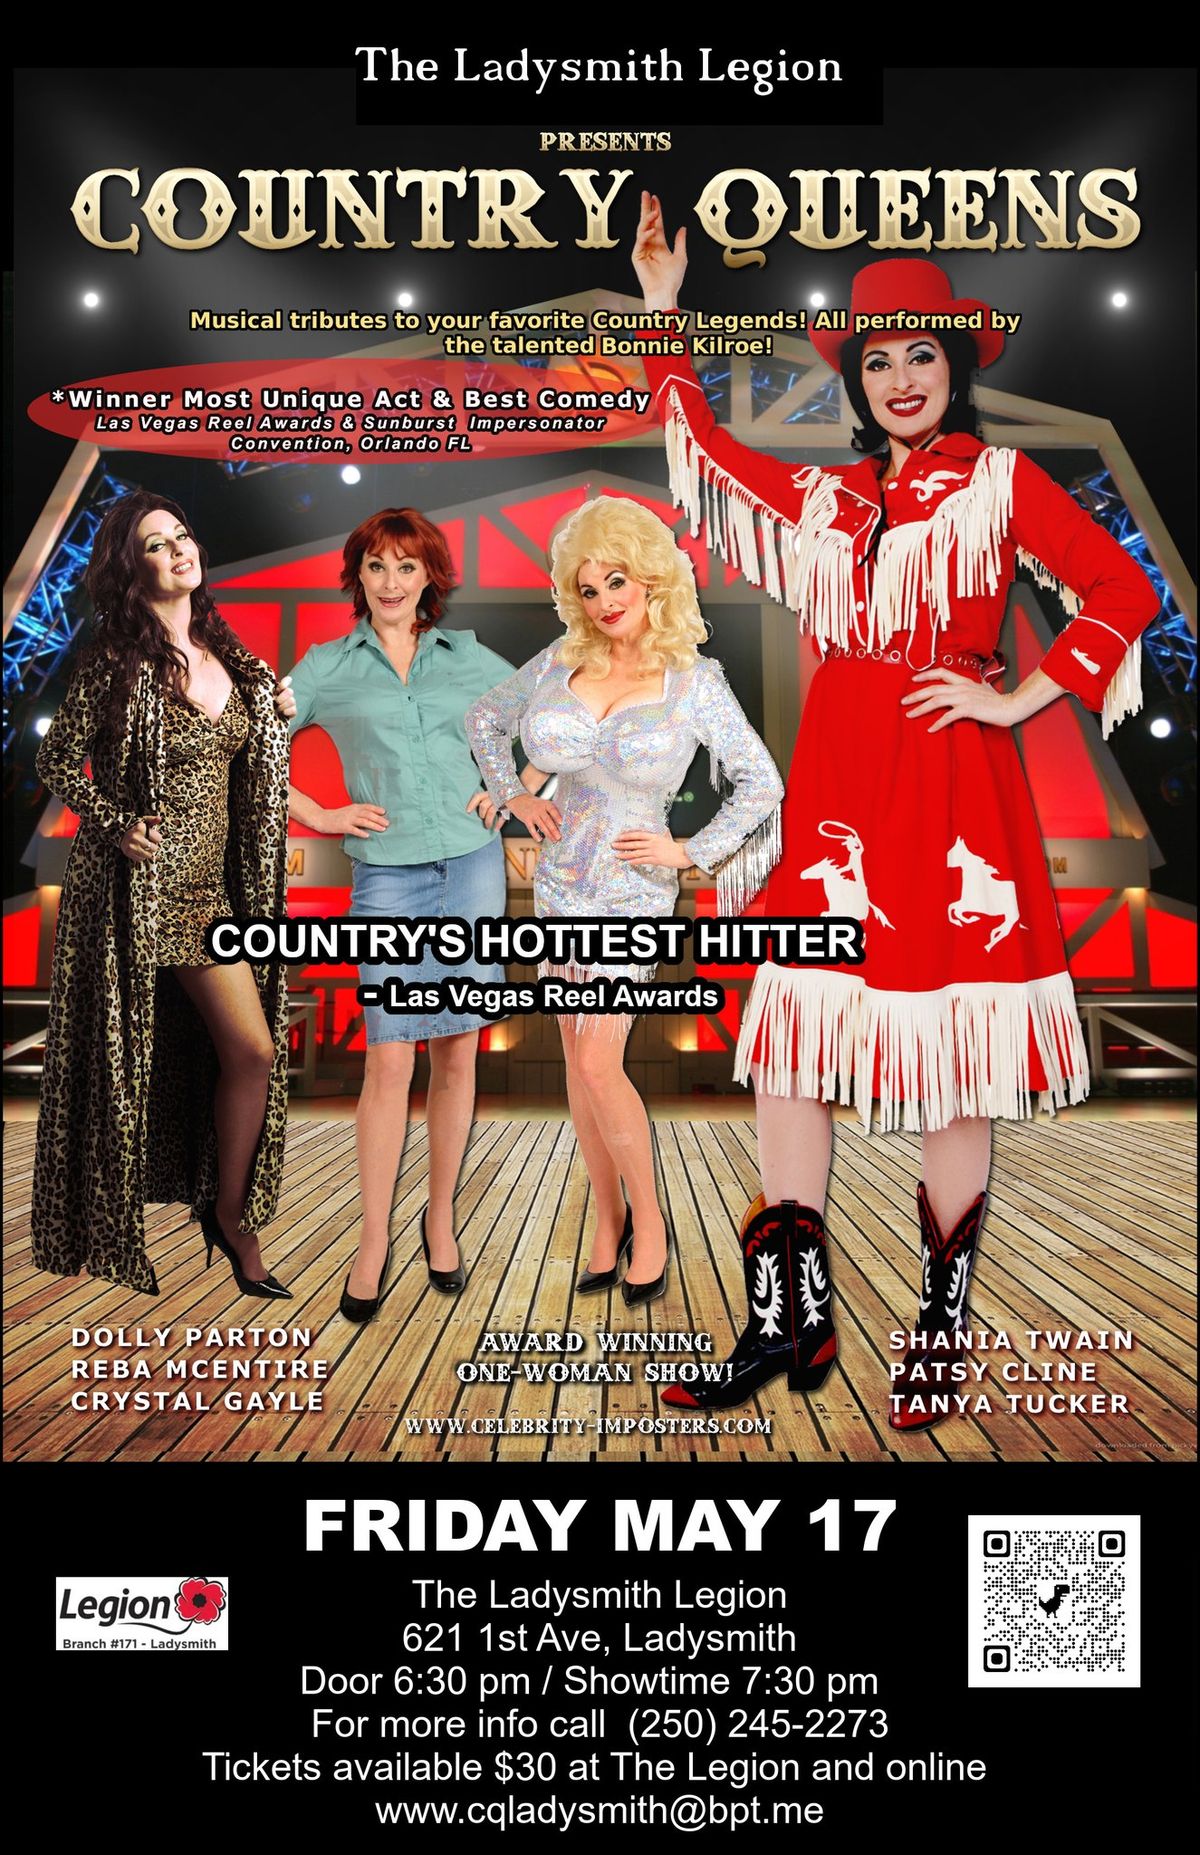 COUNTRY QUEENS comes to LADYSMITH